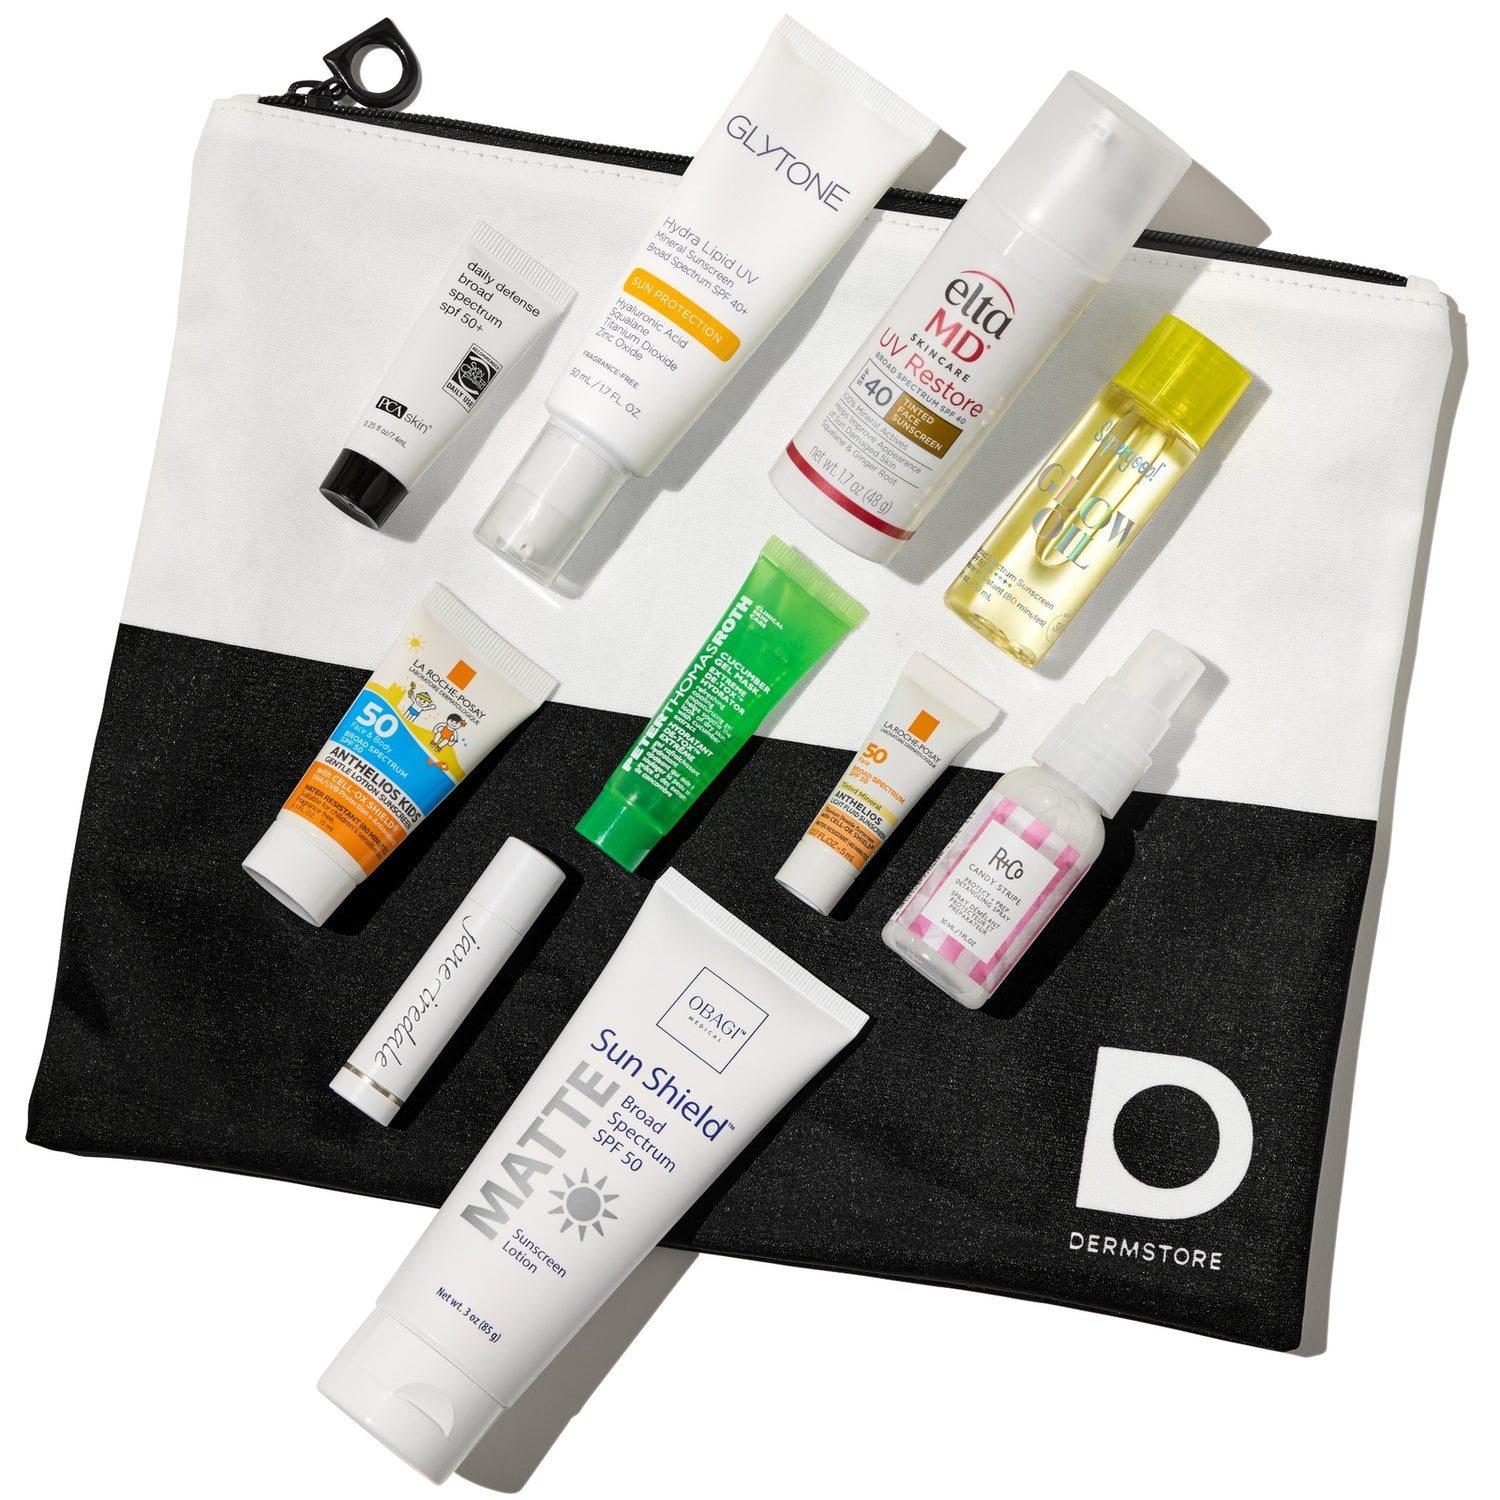 Read more about the article Best of Dermstore Skin Care Foundation x Dermstore Sun Protection Kit